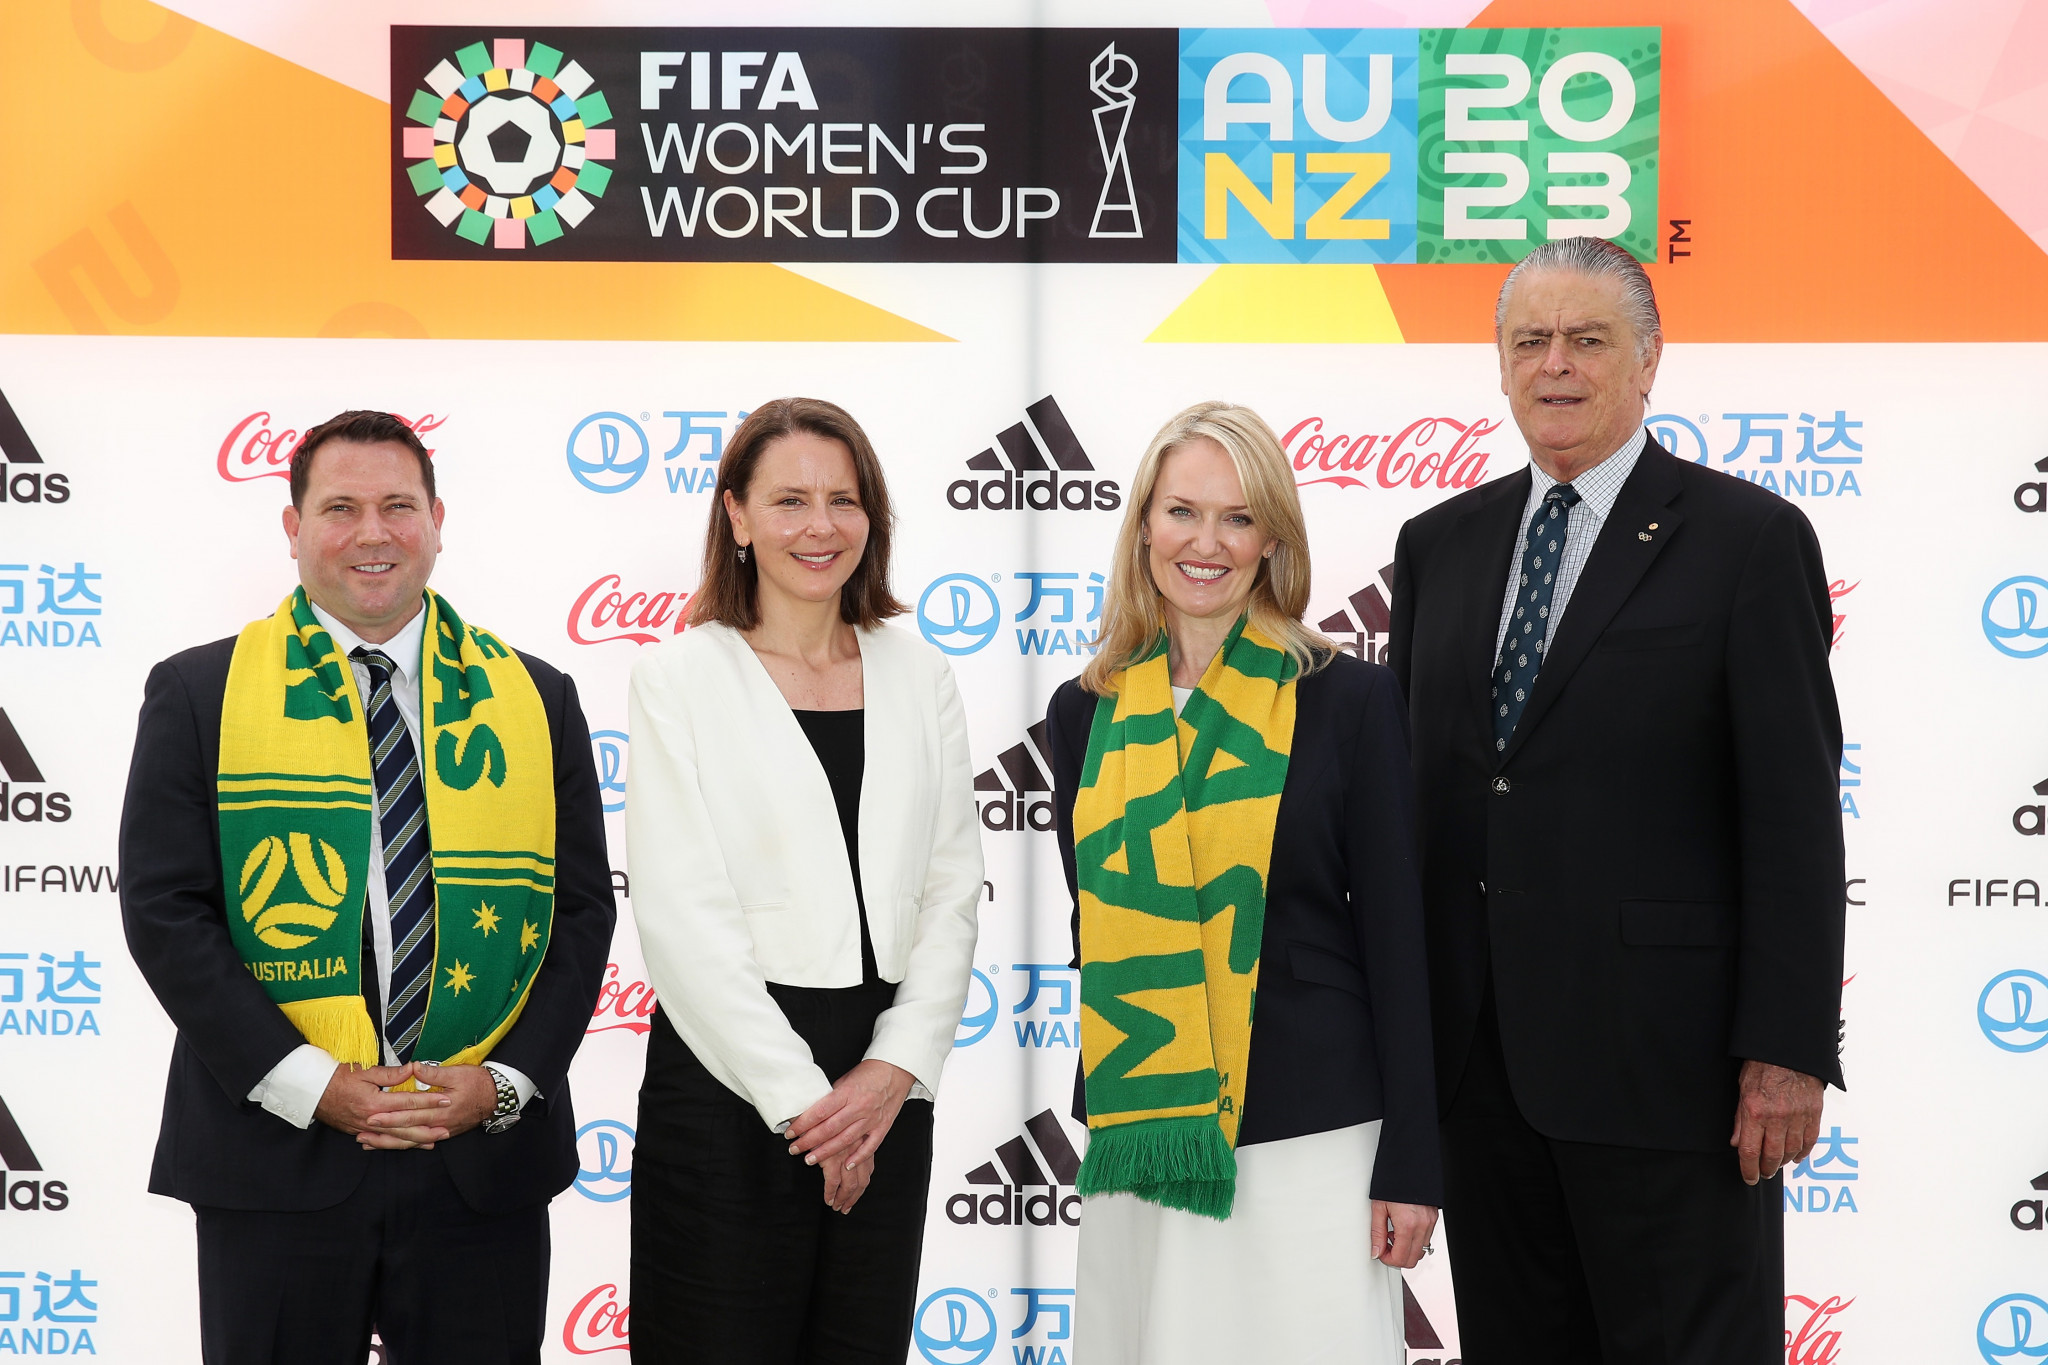 Australia is due to host the 2023 FIFA Women's World Cup alongside New Zealand and COVID-19 requirements are being monitored ©Getty Images